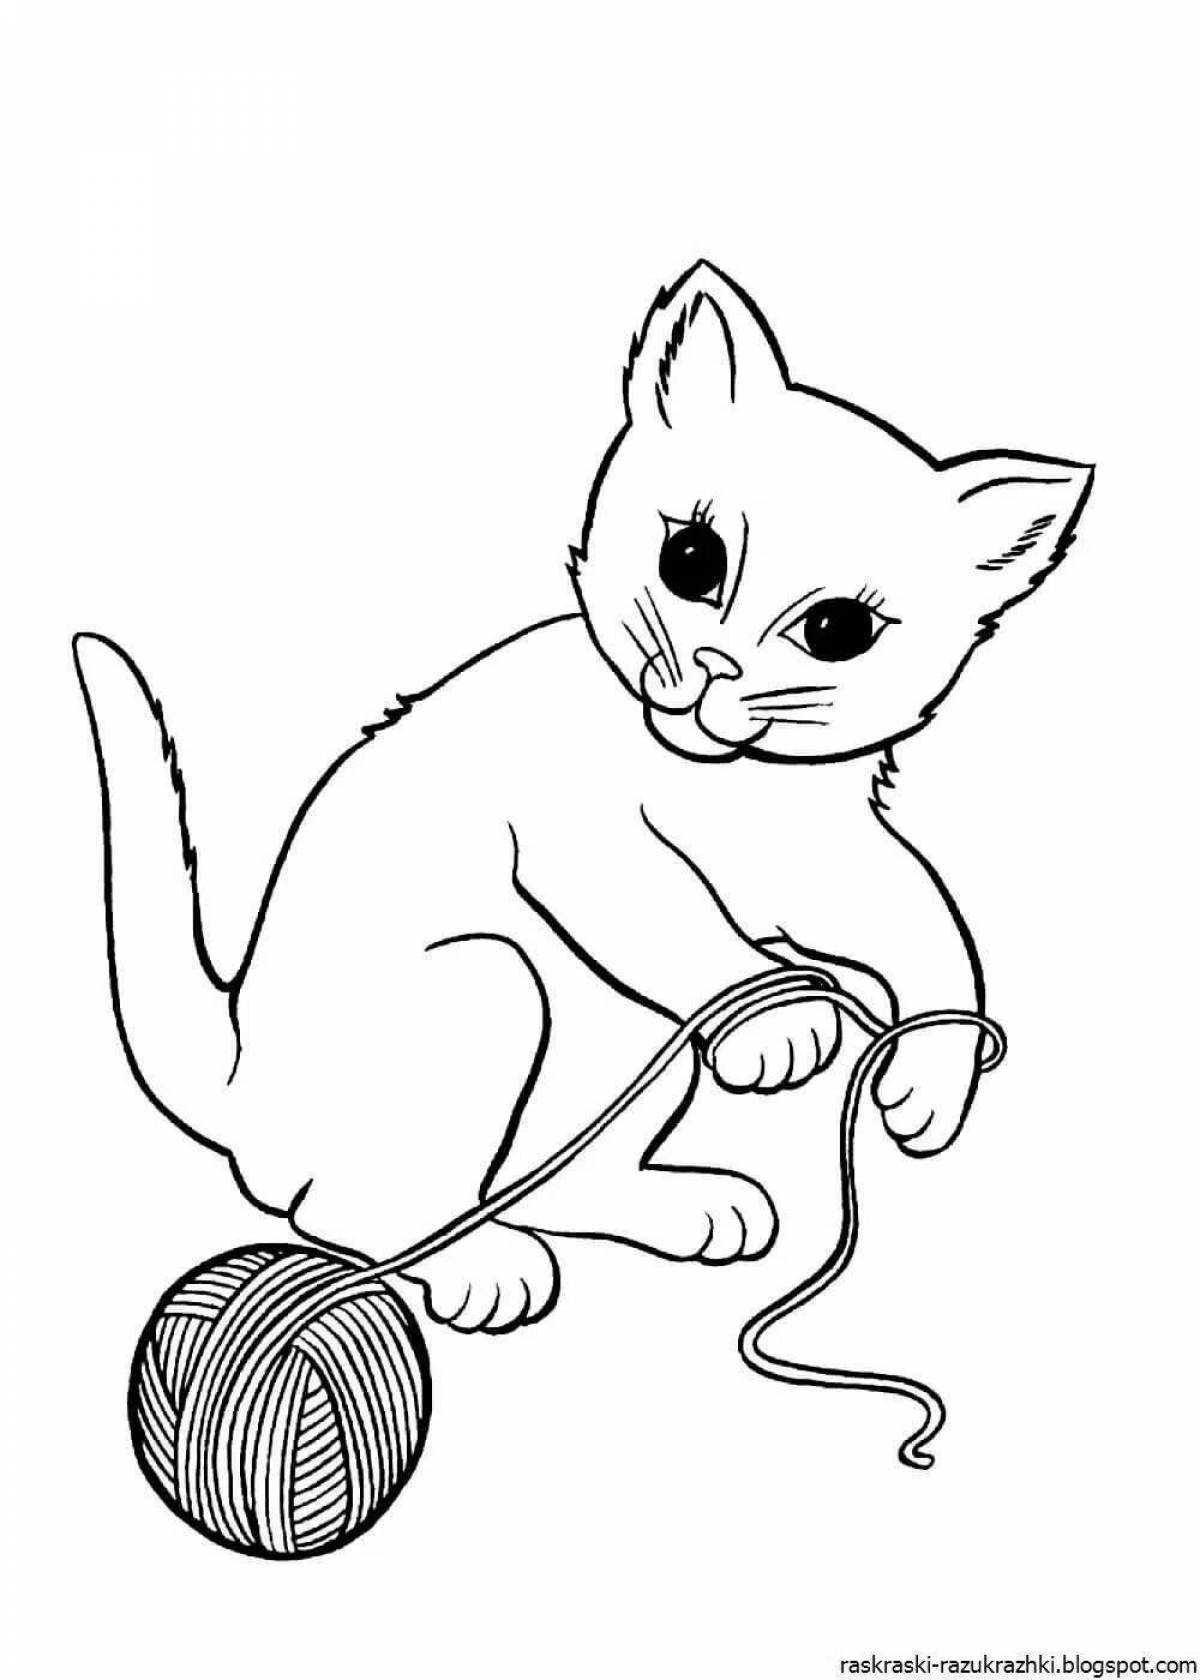 Fun drawing of a kitten for kids